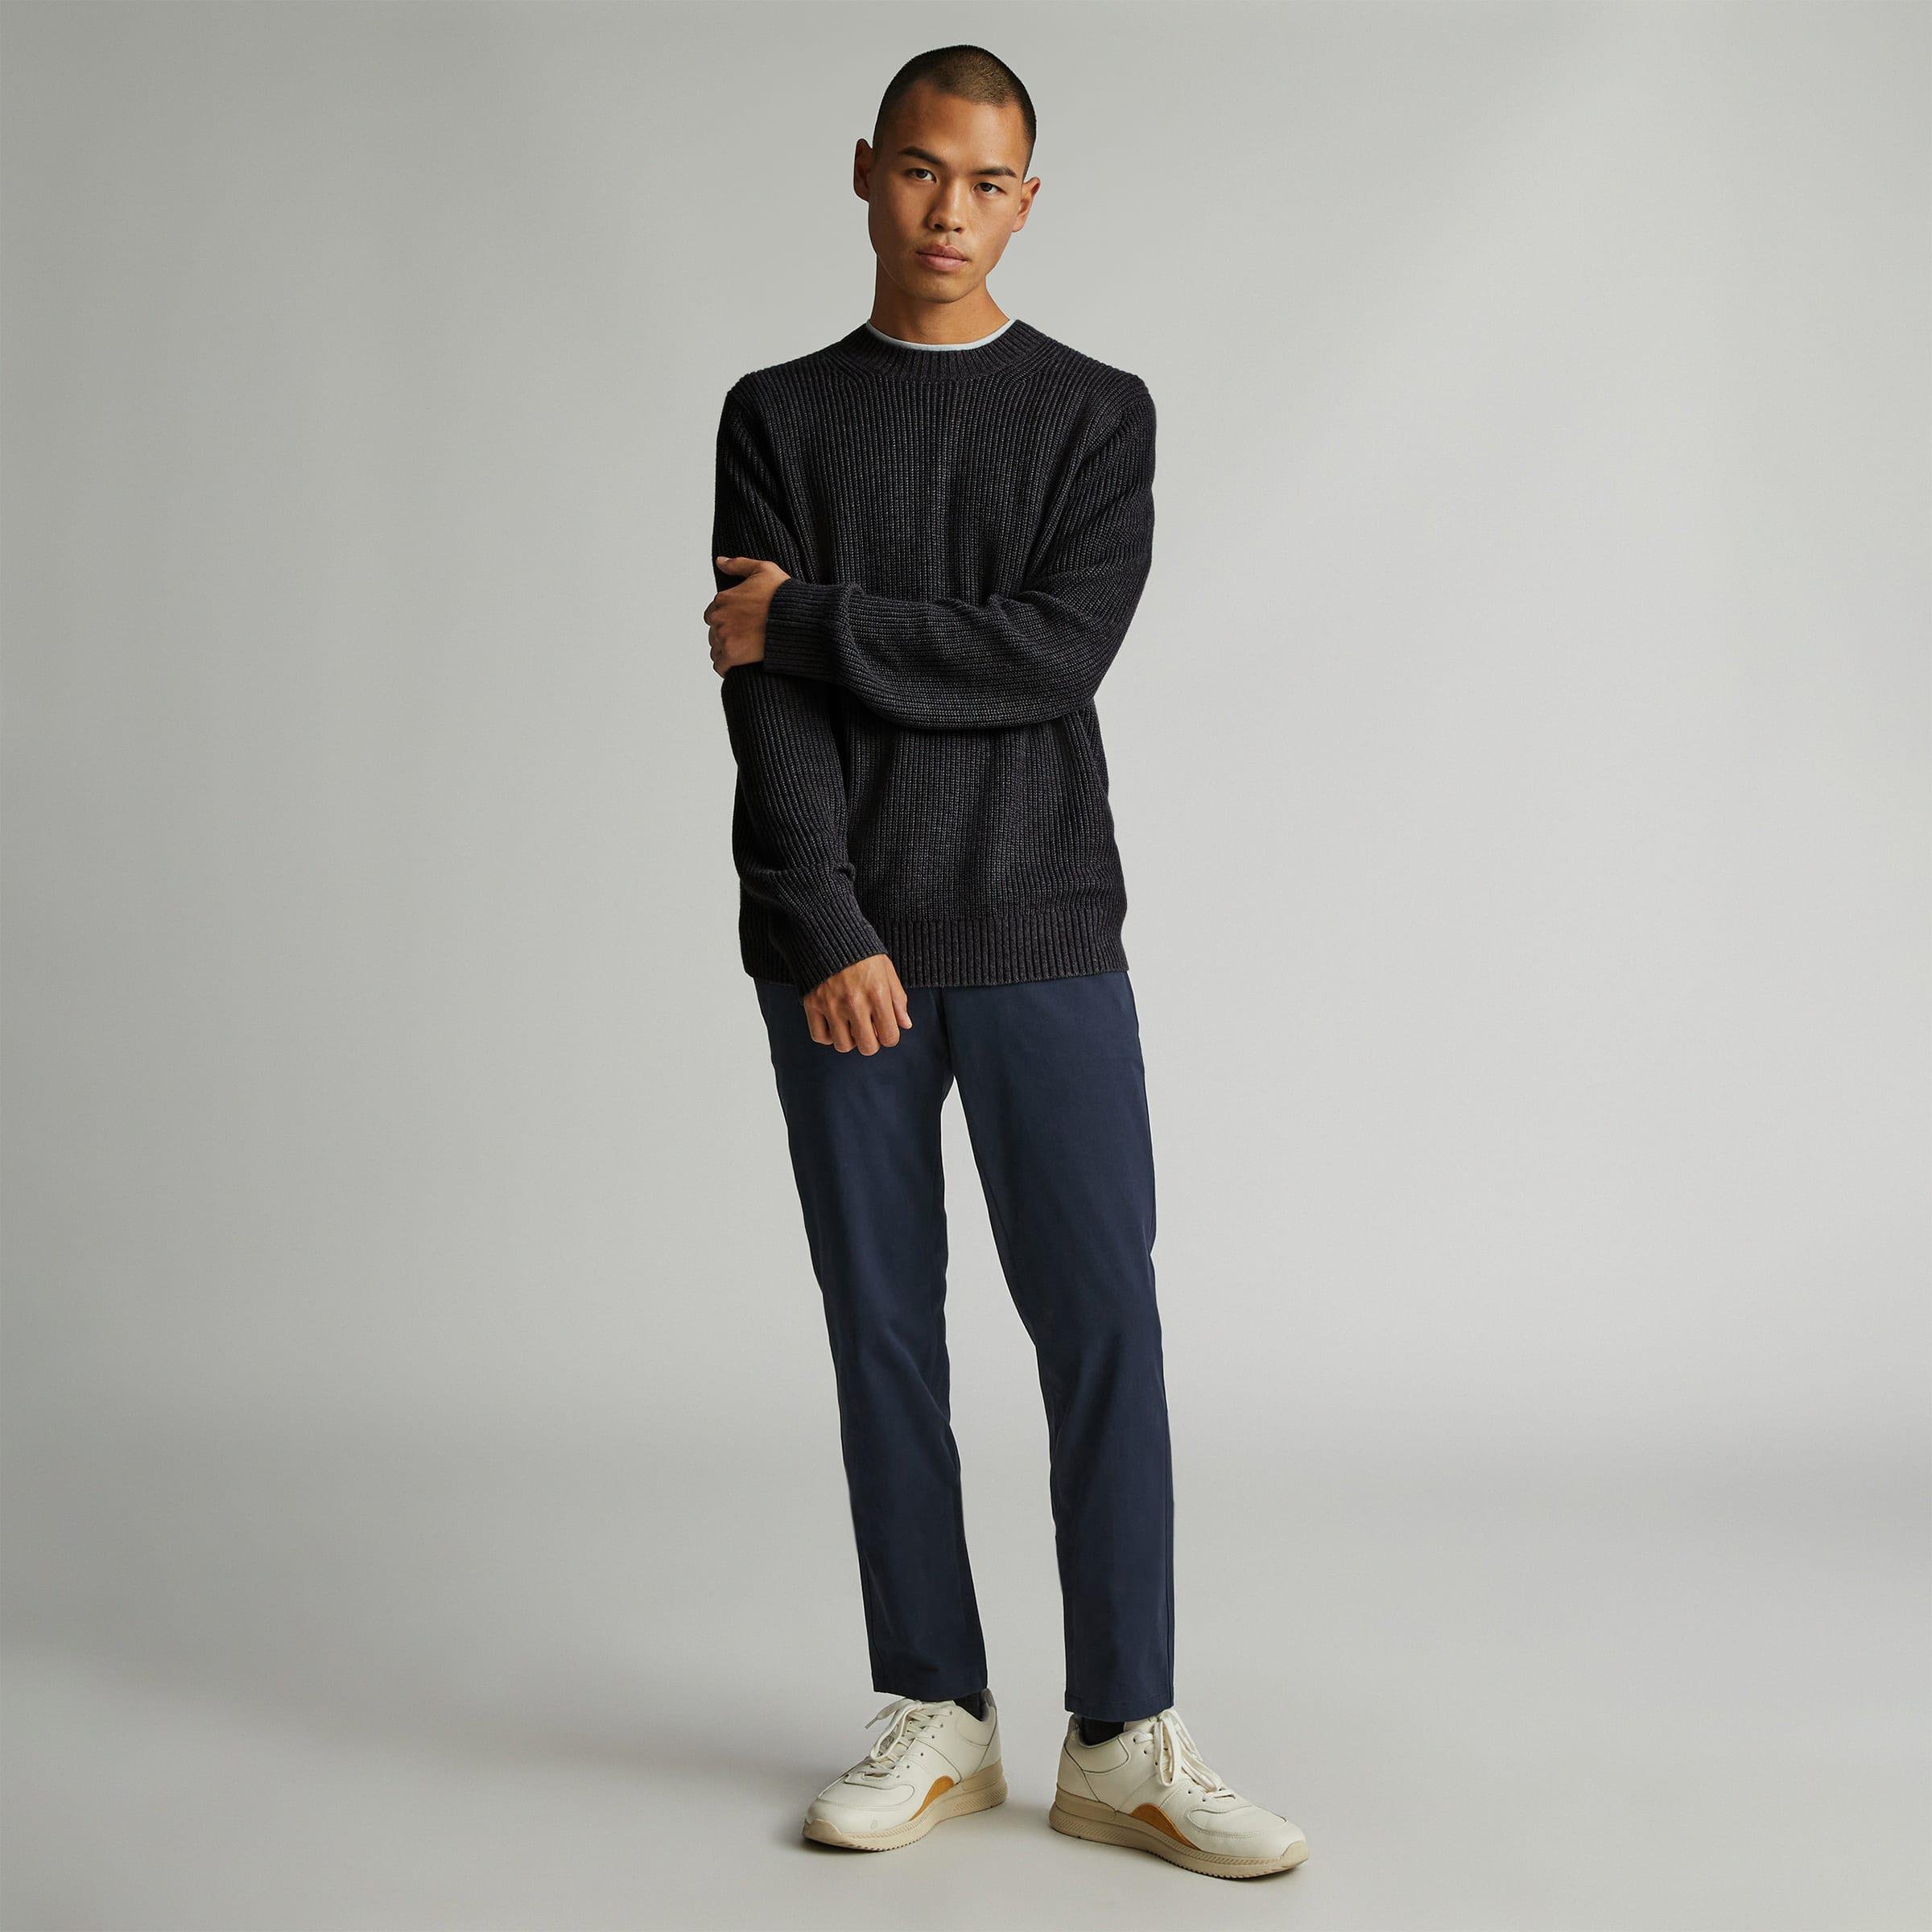 The No-Sweat Ribbed Crew by EVERLANE